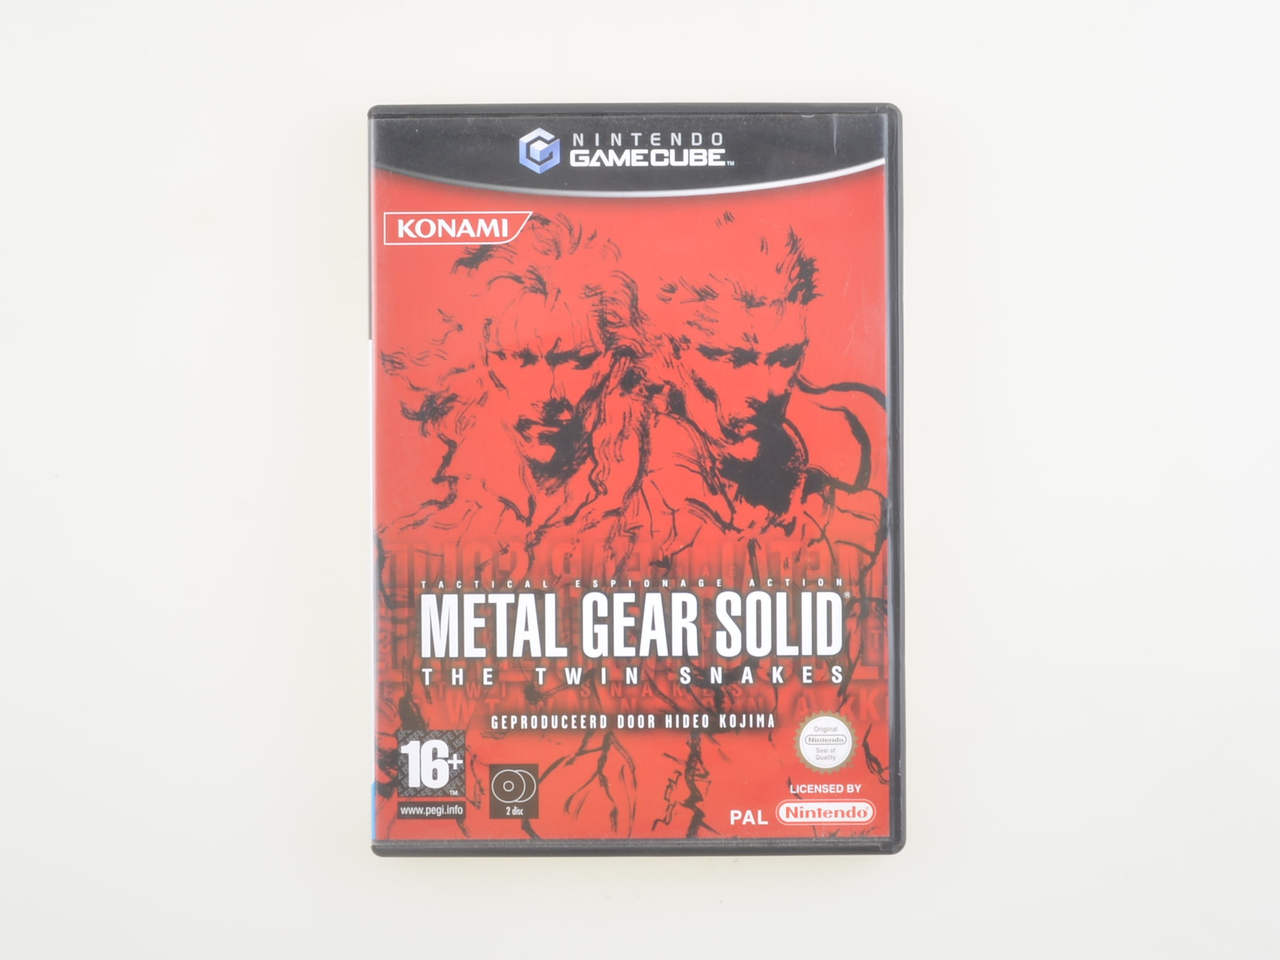 Metal Gear Solid: The Twin Snakes Kopen | Gamecube Games